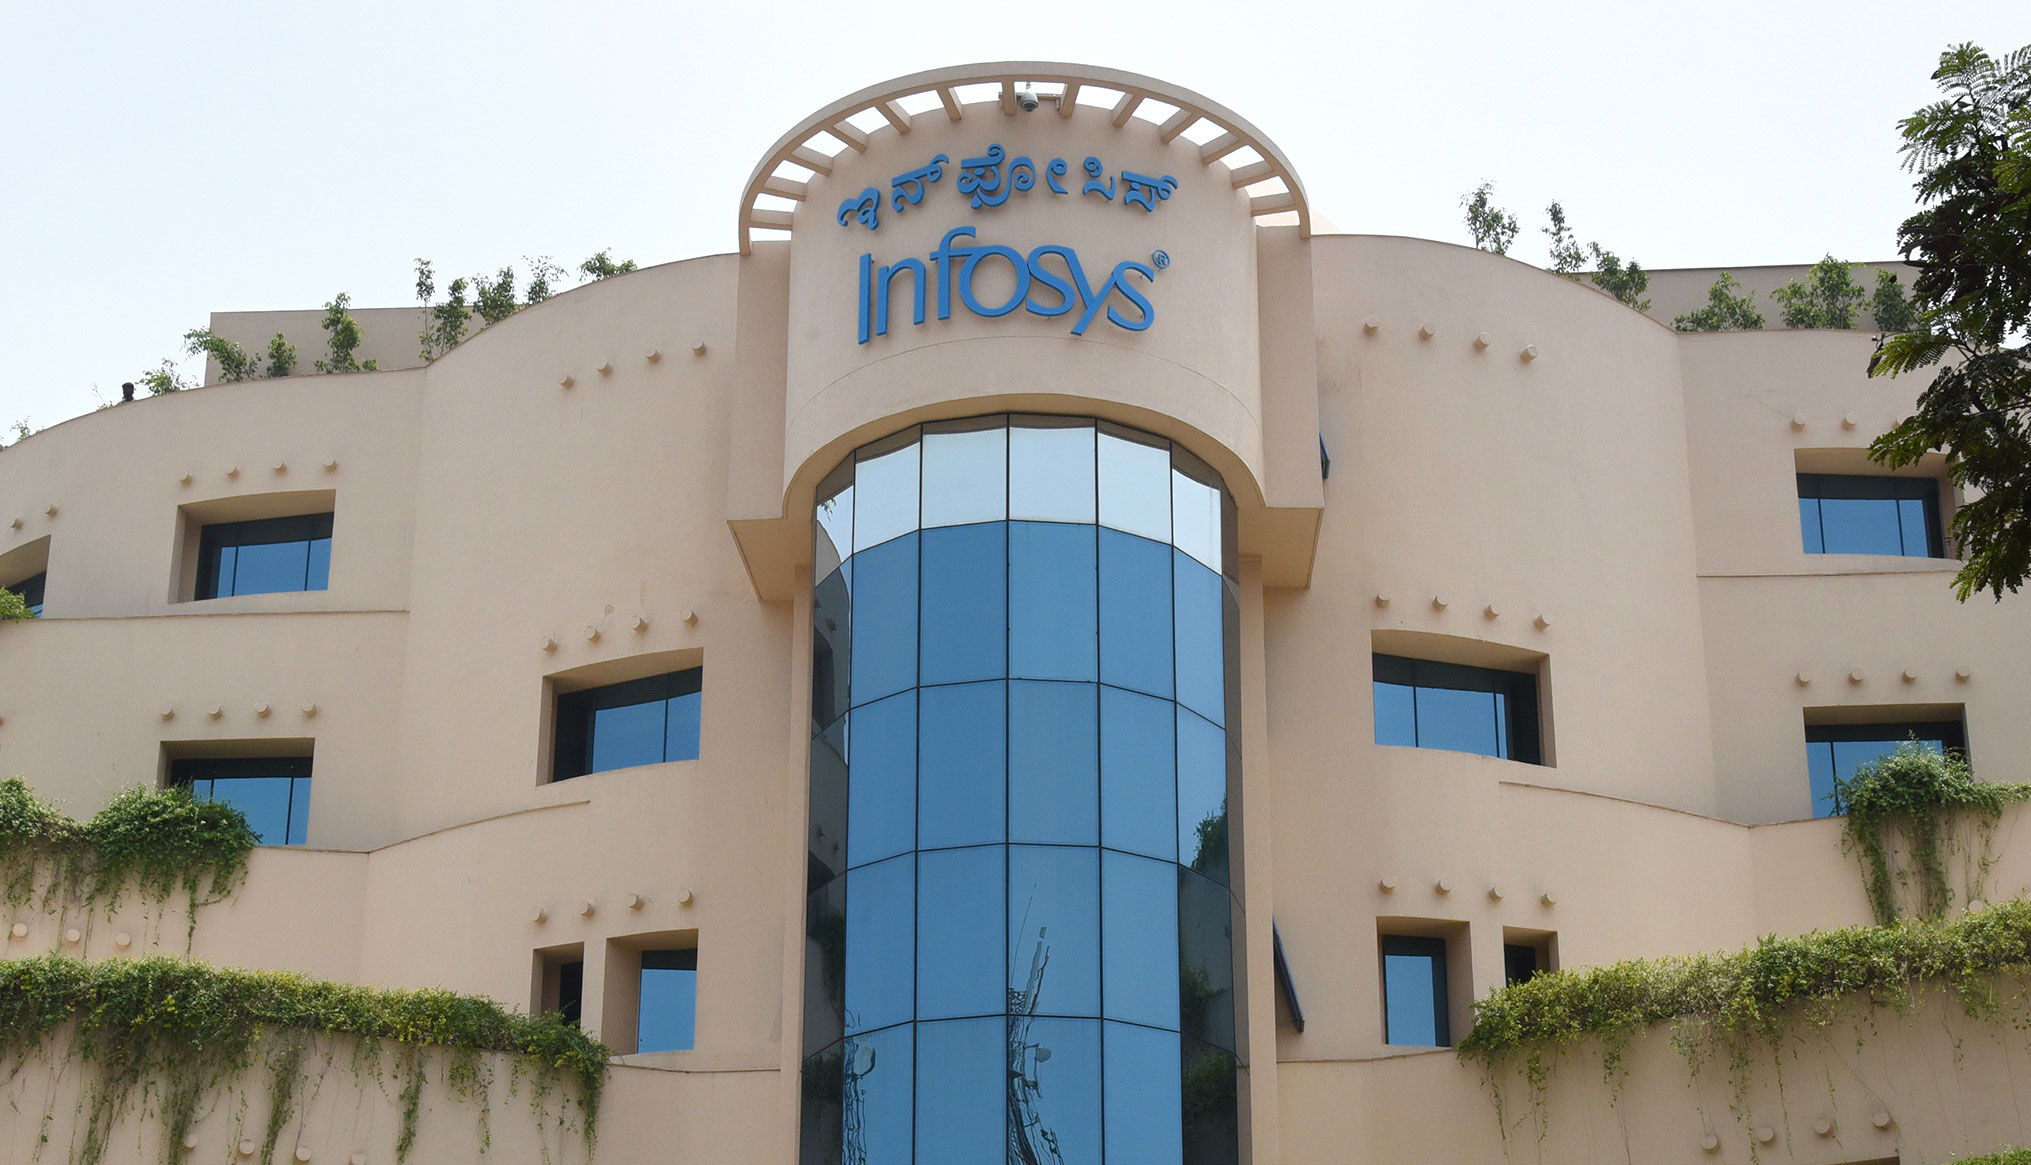 This was one of the key messages that the top management of Infosys sent out to its shareholders as the country’s second-largest IT services firm held its 39th annual general meeting (AGM) virtually.

